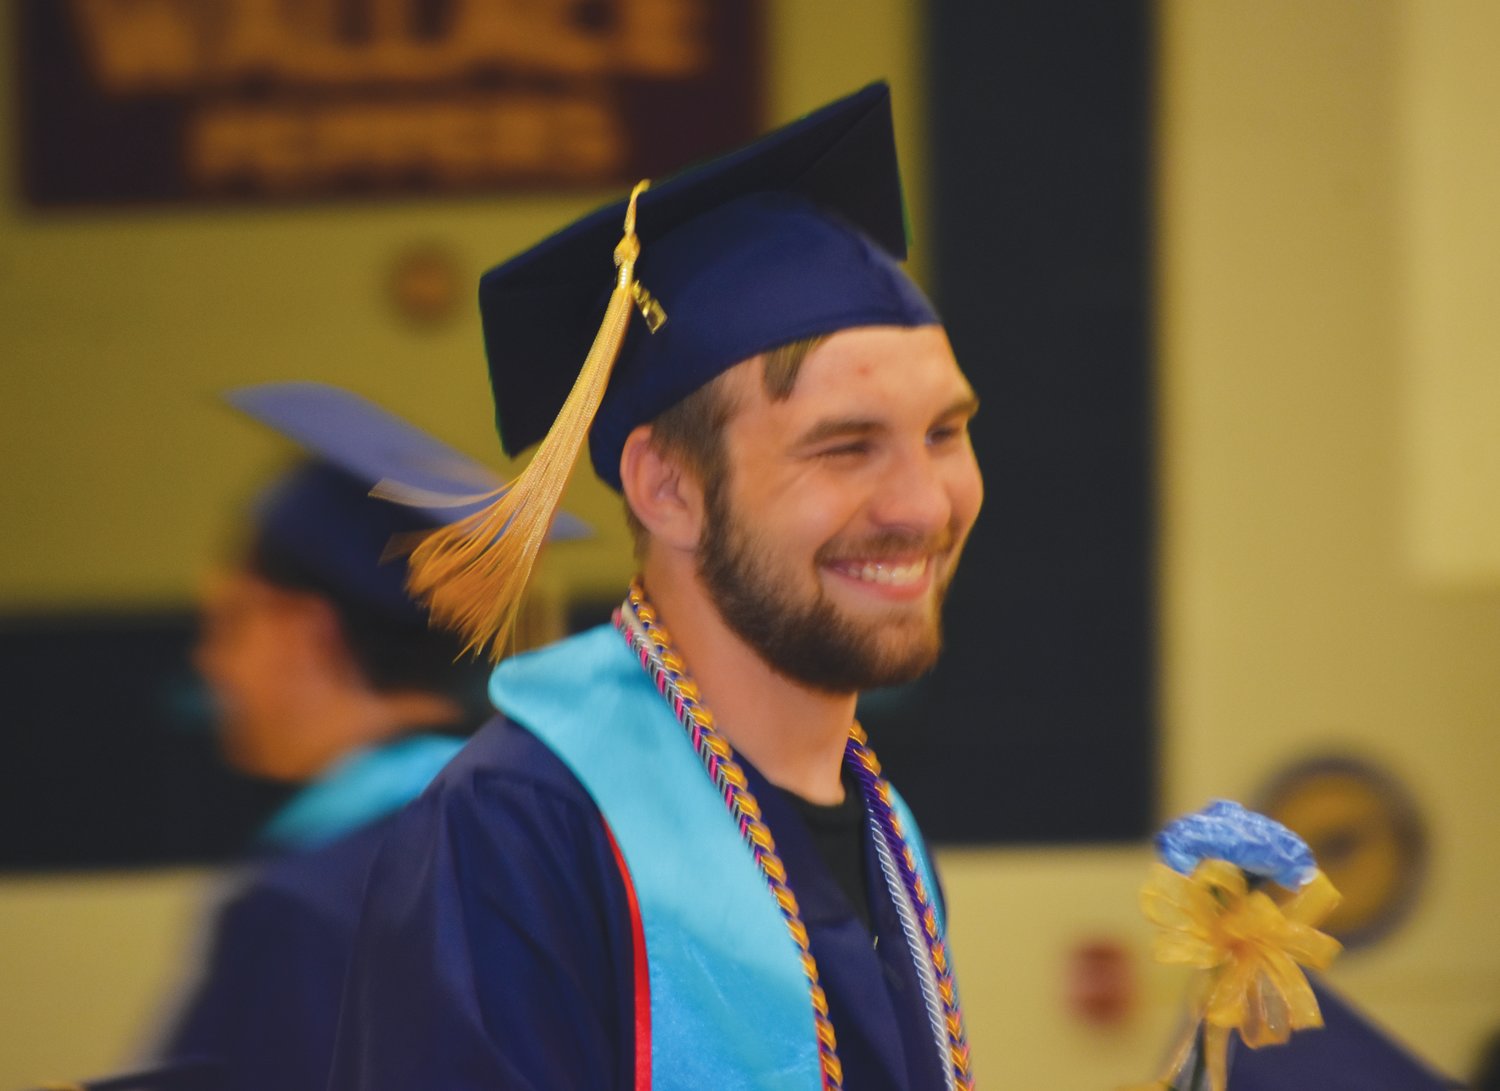 Willie Frazee smiles during the commencement exercises at Fountain Central High School.